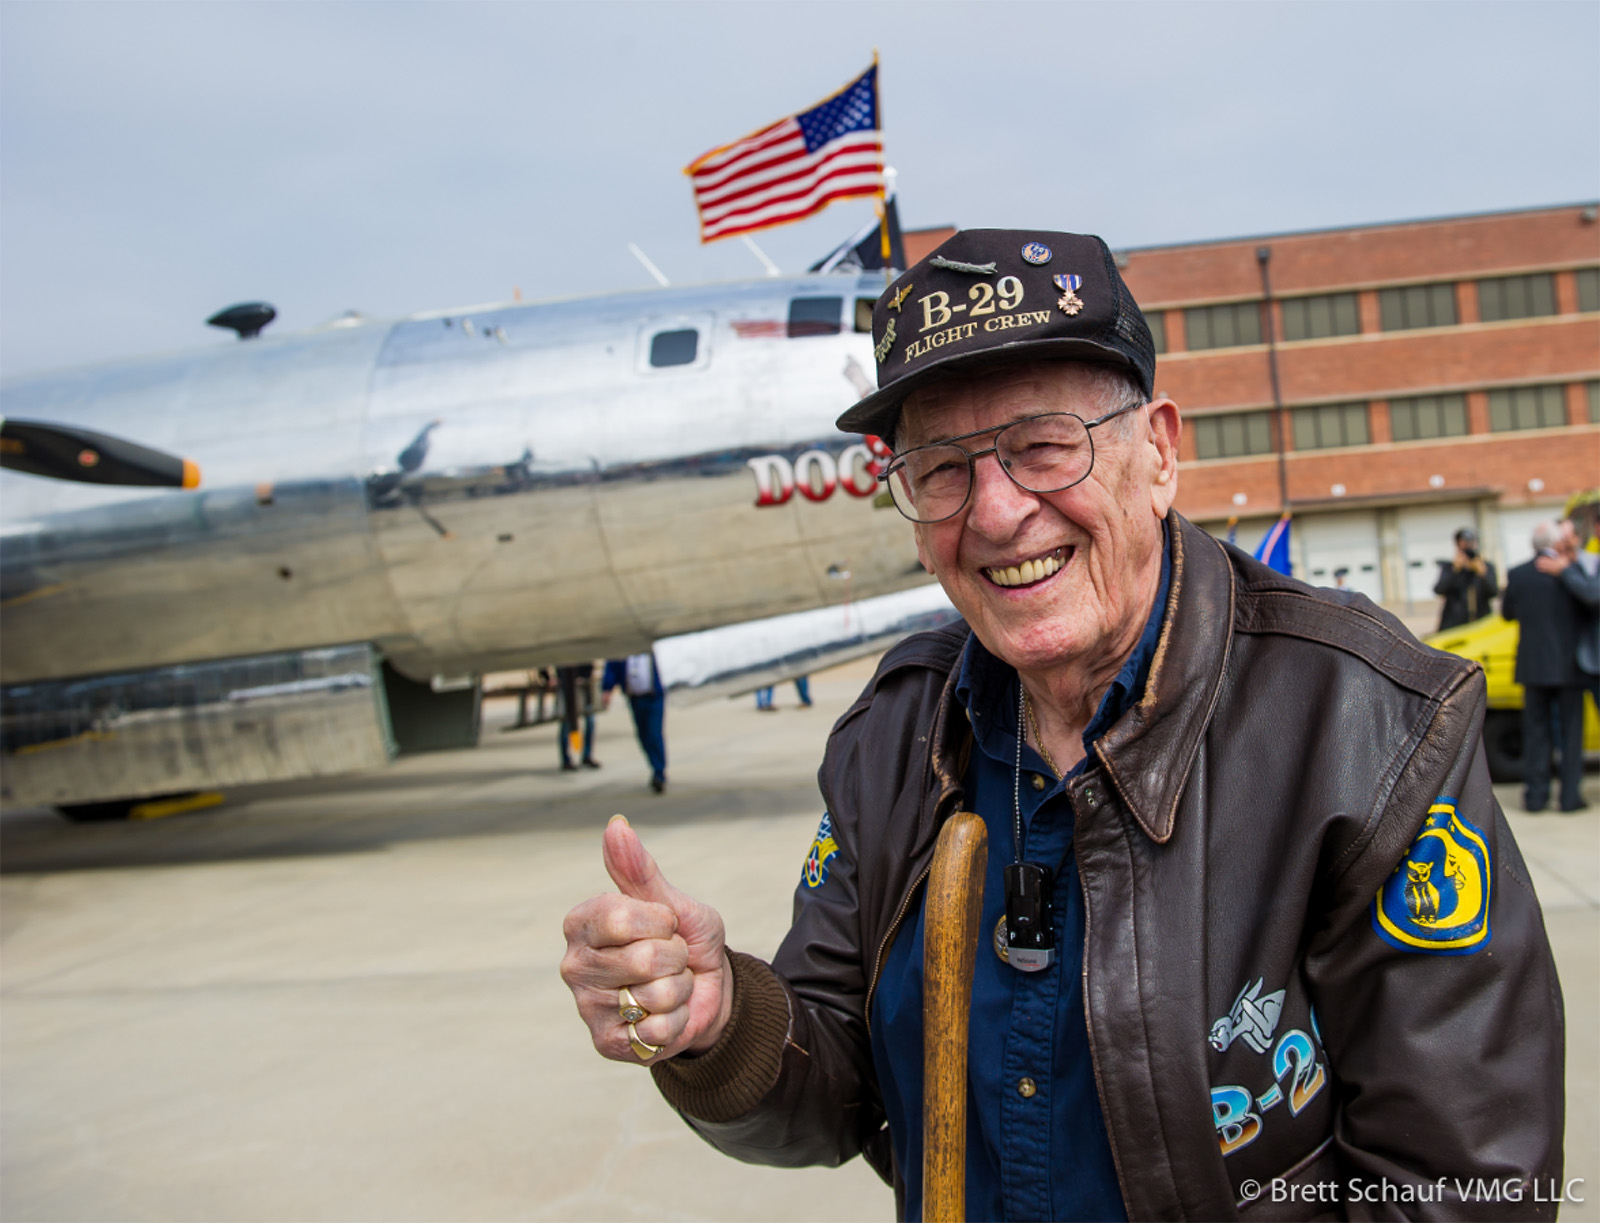 One of the B-29 veterans on hand to watch 'Doc' as she emerged from her hangar. (photo by Brett Schauf VLG LLC)